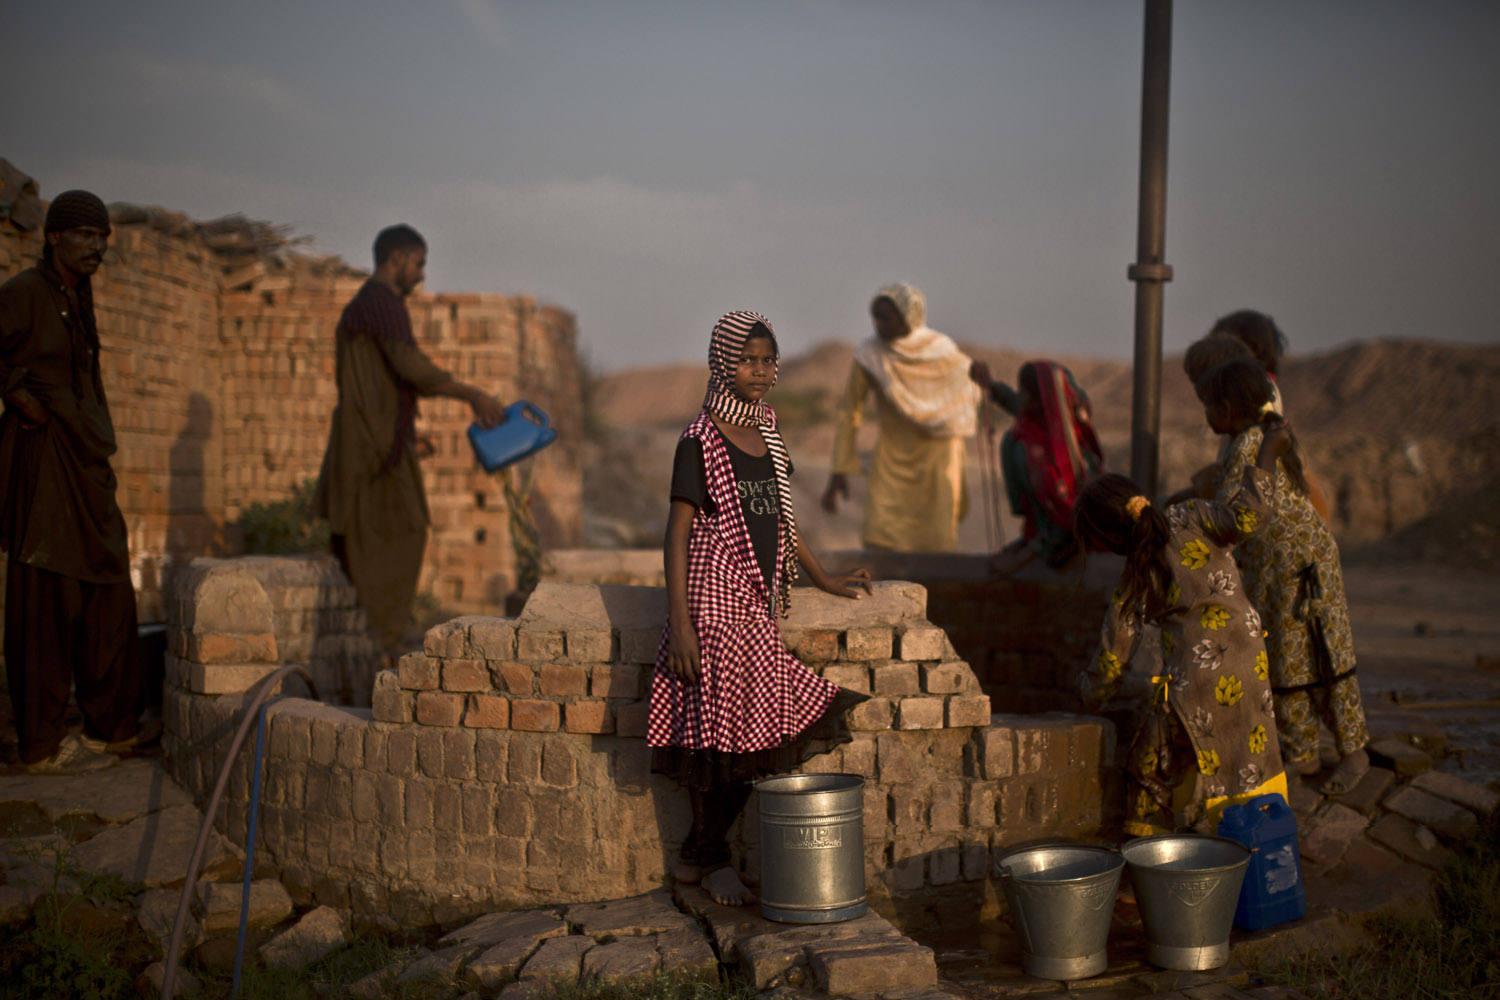 Oct. 22, 2013. Pakistani women and children, collect water from a well on the outskirts of Islamabad, Pakistan.